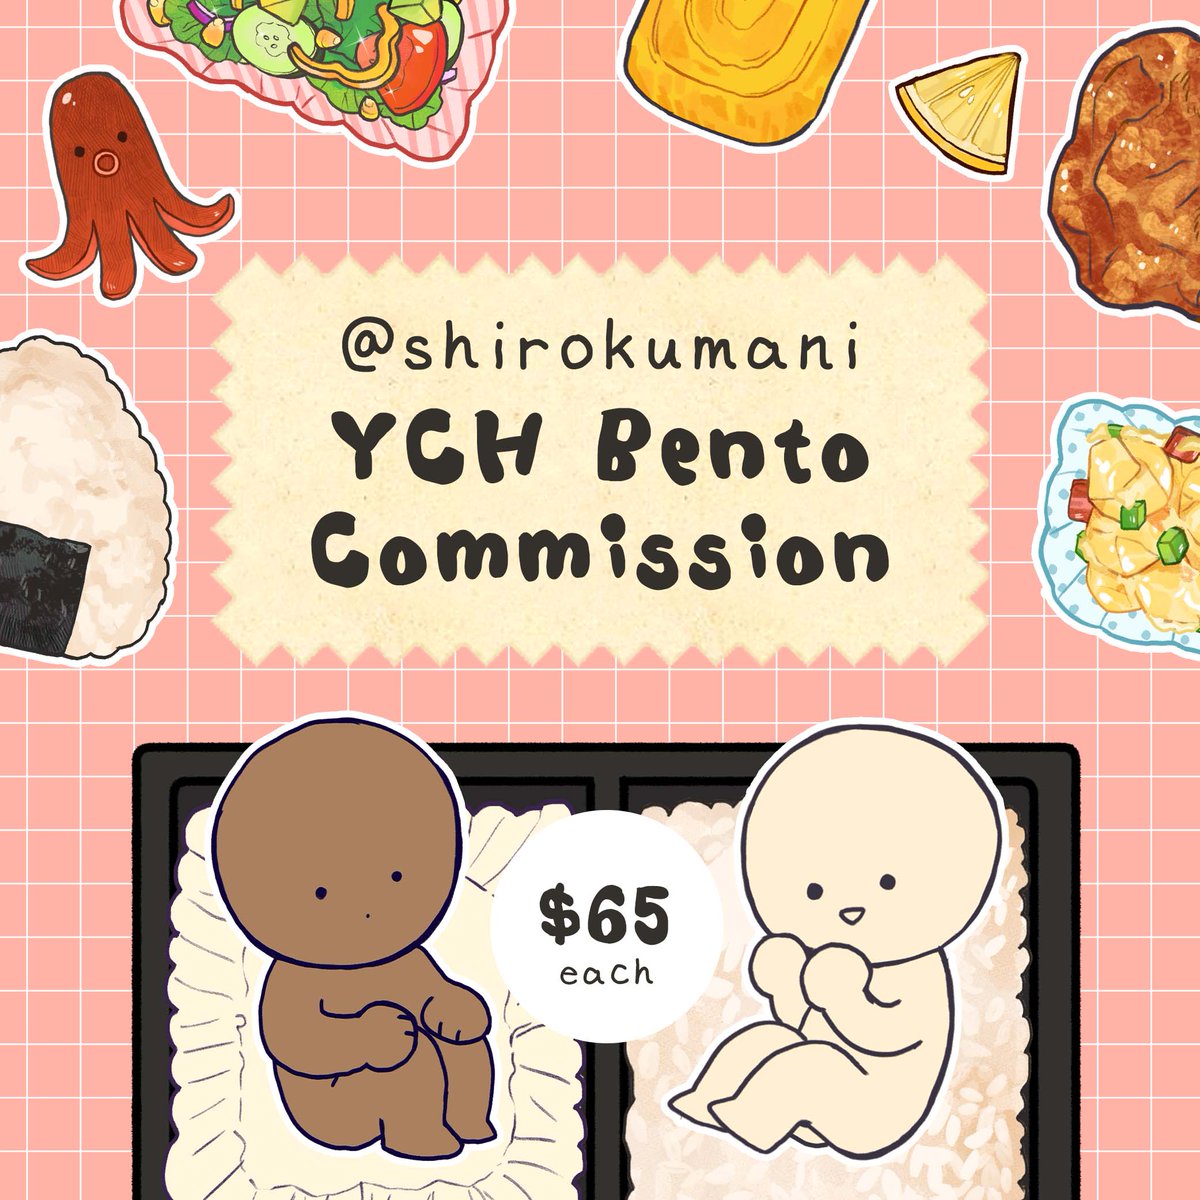 [RT Appreciated!] I'm opening a YCH chibi bento box commission! feel free to dm me if you have any questions :> i'll be taking around 4 slots this time!

details> https://t.co/W3H9XqBaor
form> https://t.co/zQX7KG7sB7 